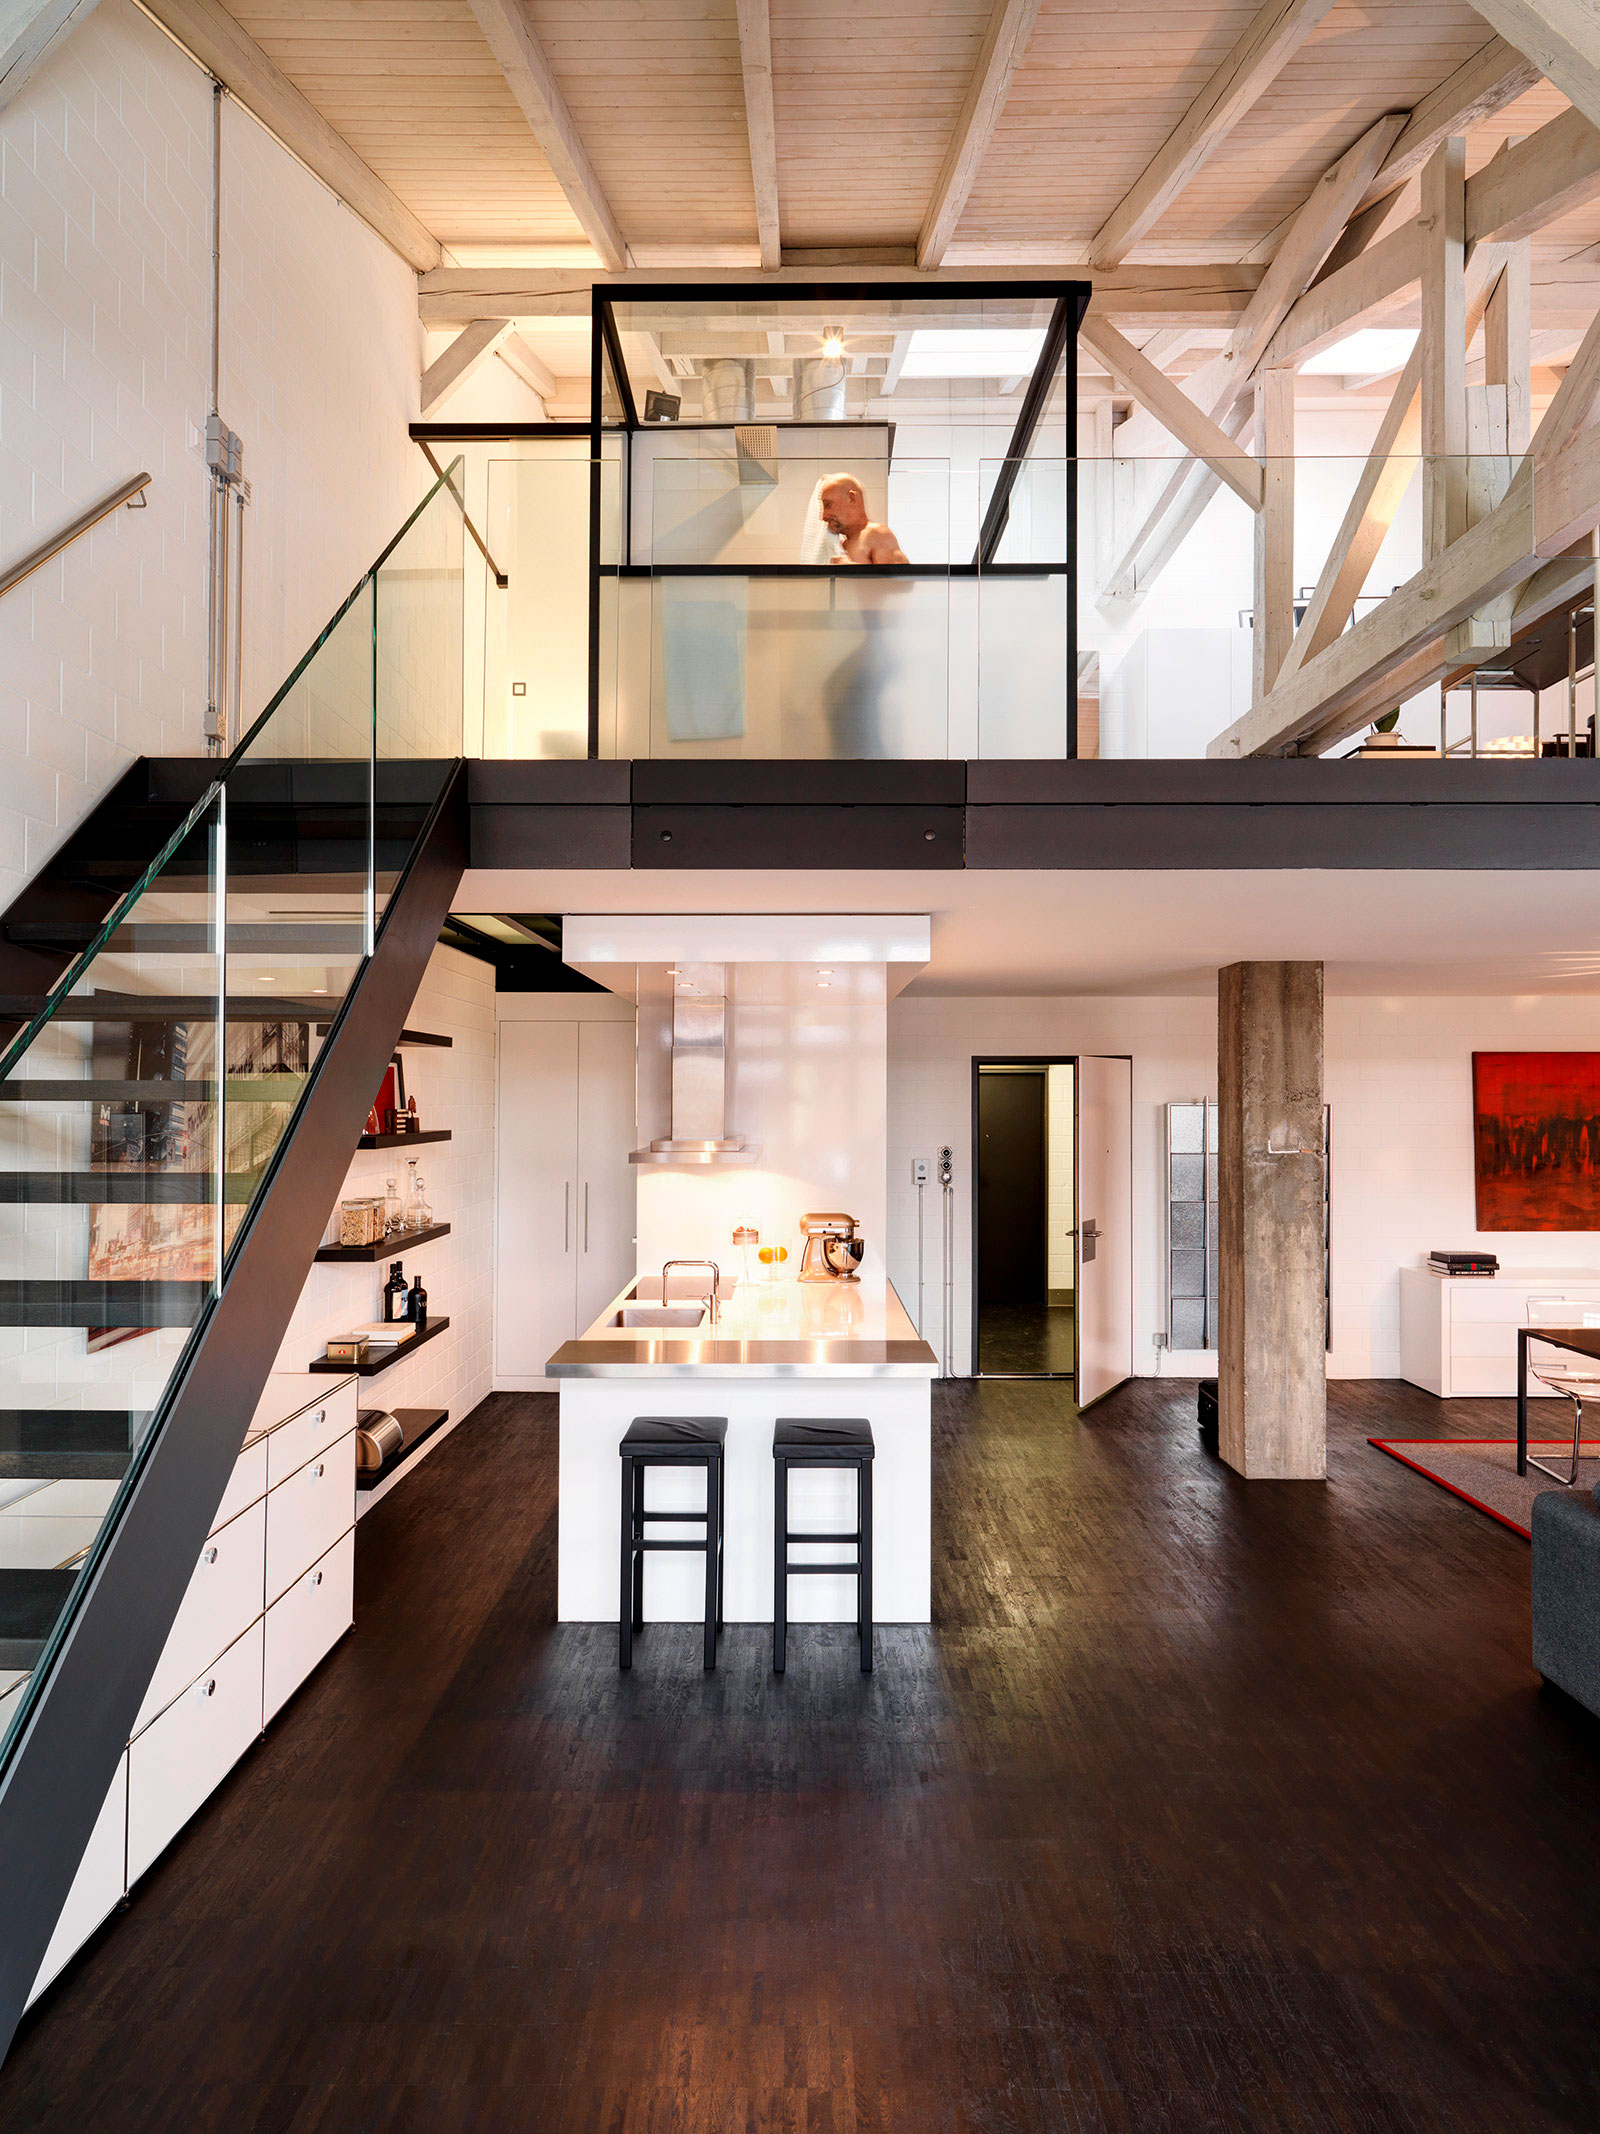 Awesome loft in Switzerland | Beautiful interiors from all over the ...